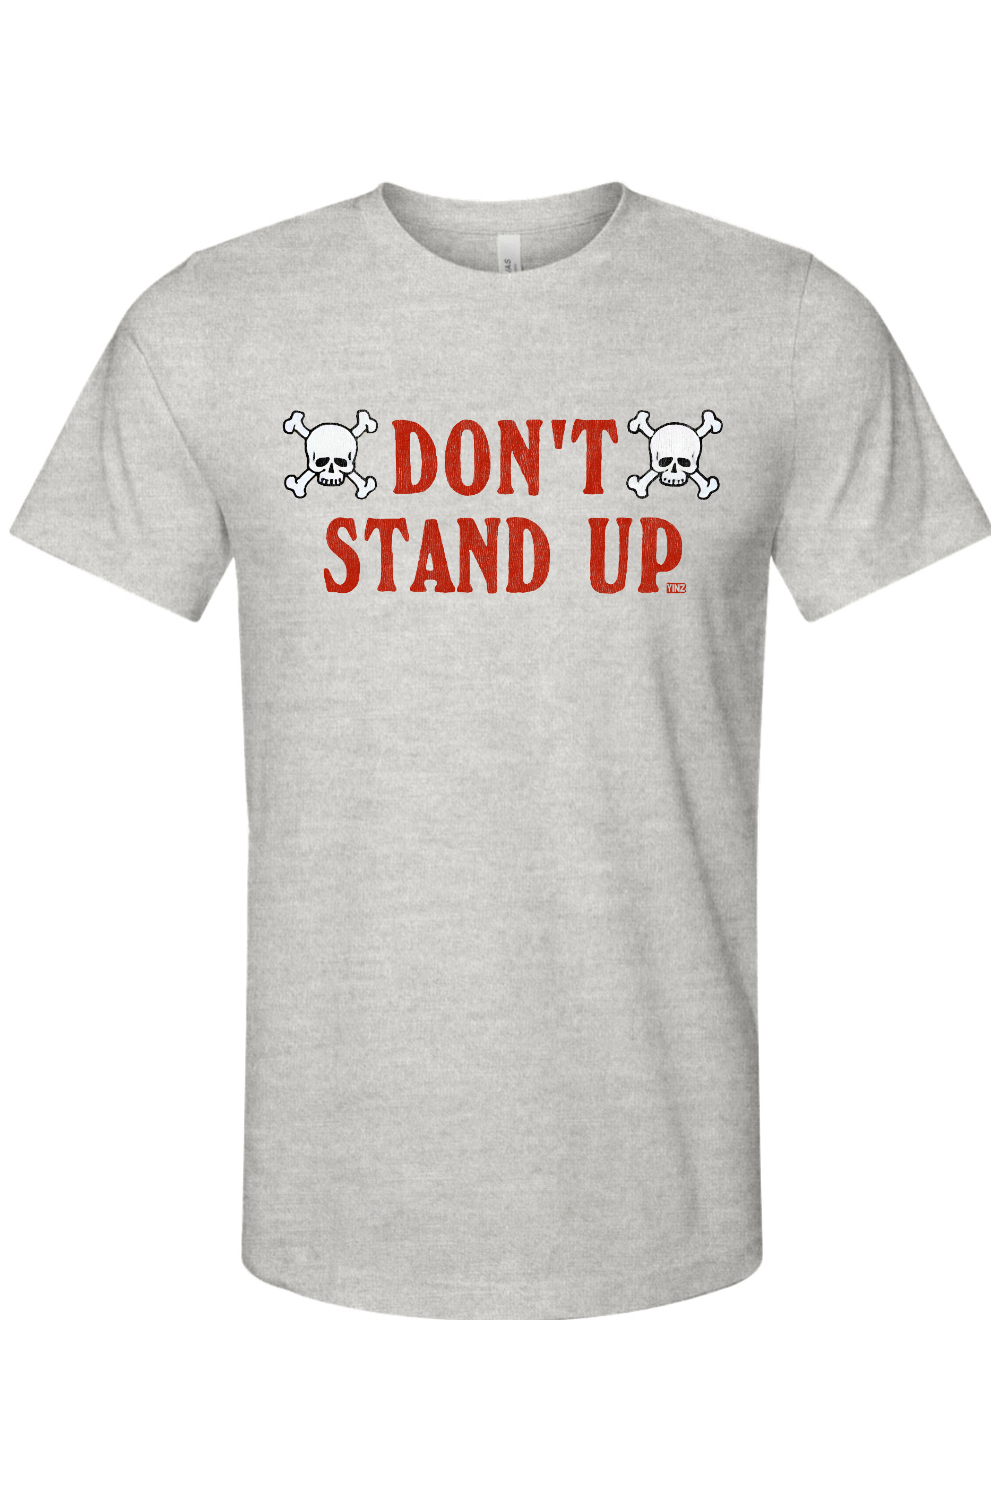 Don't Stand Up - Bella + Canvas Jersey Tee - Yinzylvania